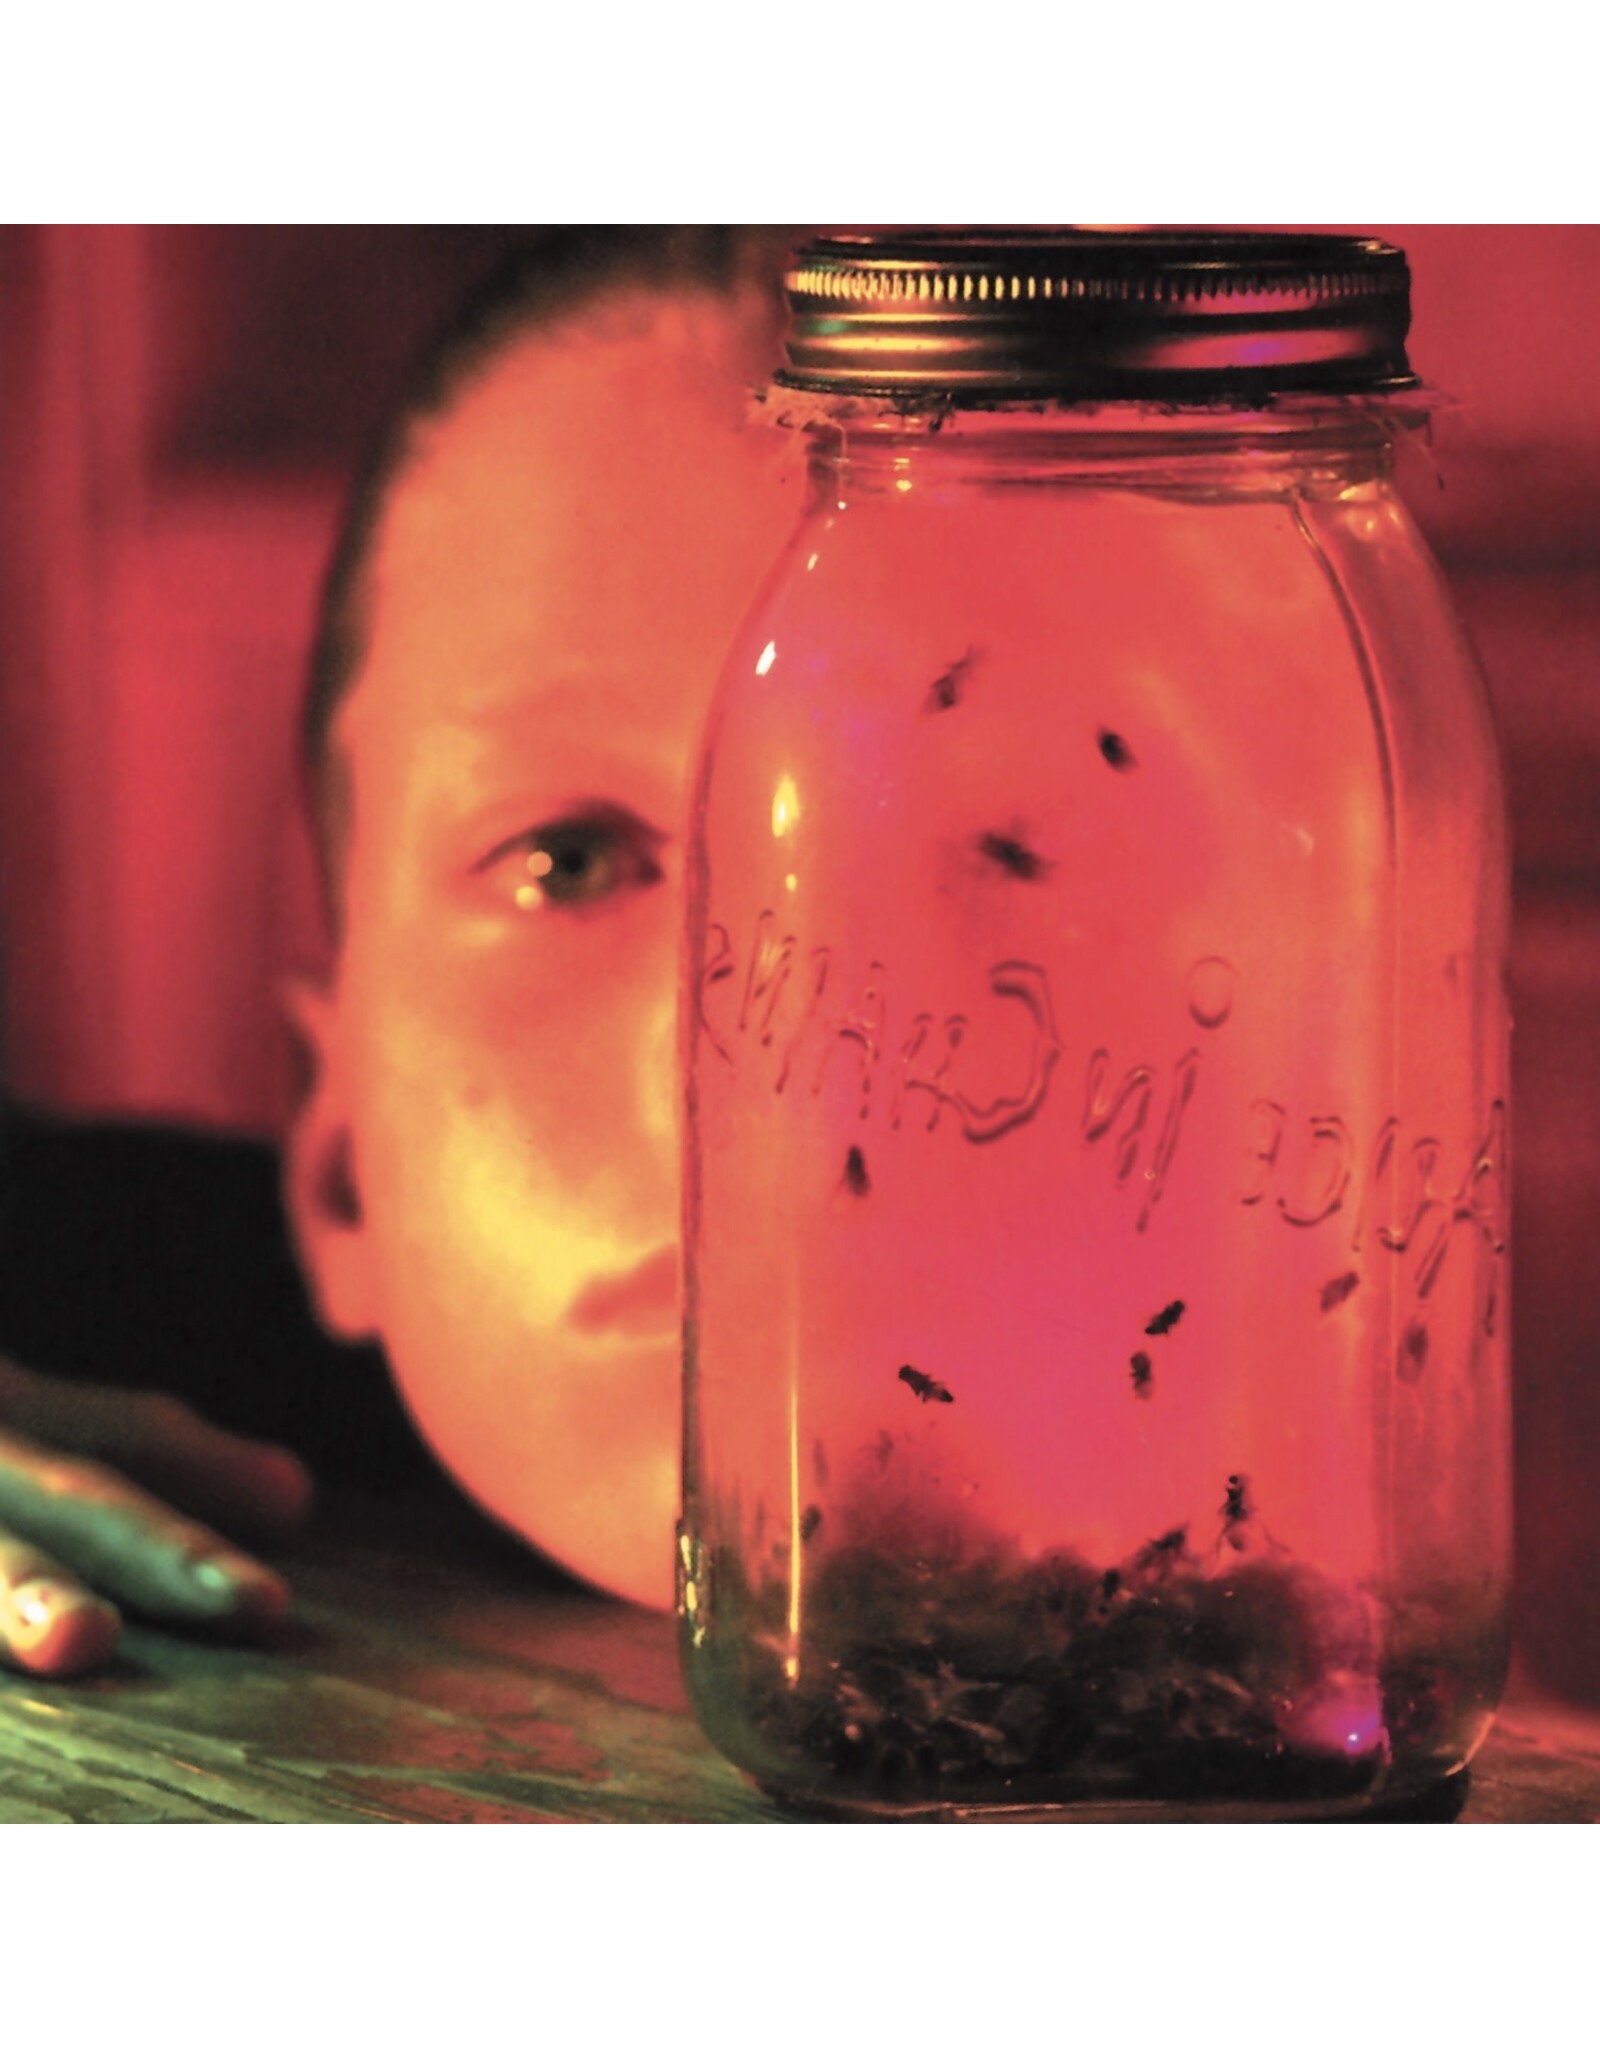 Alice In Chains - Jar Of Flies (30th Anniversary)